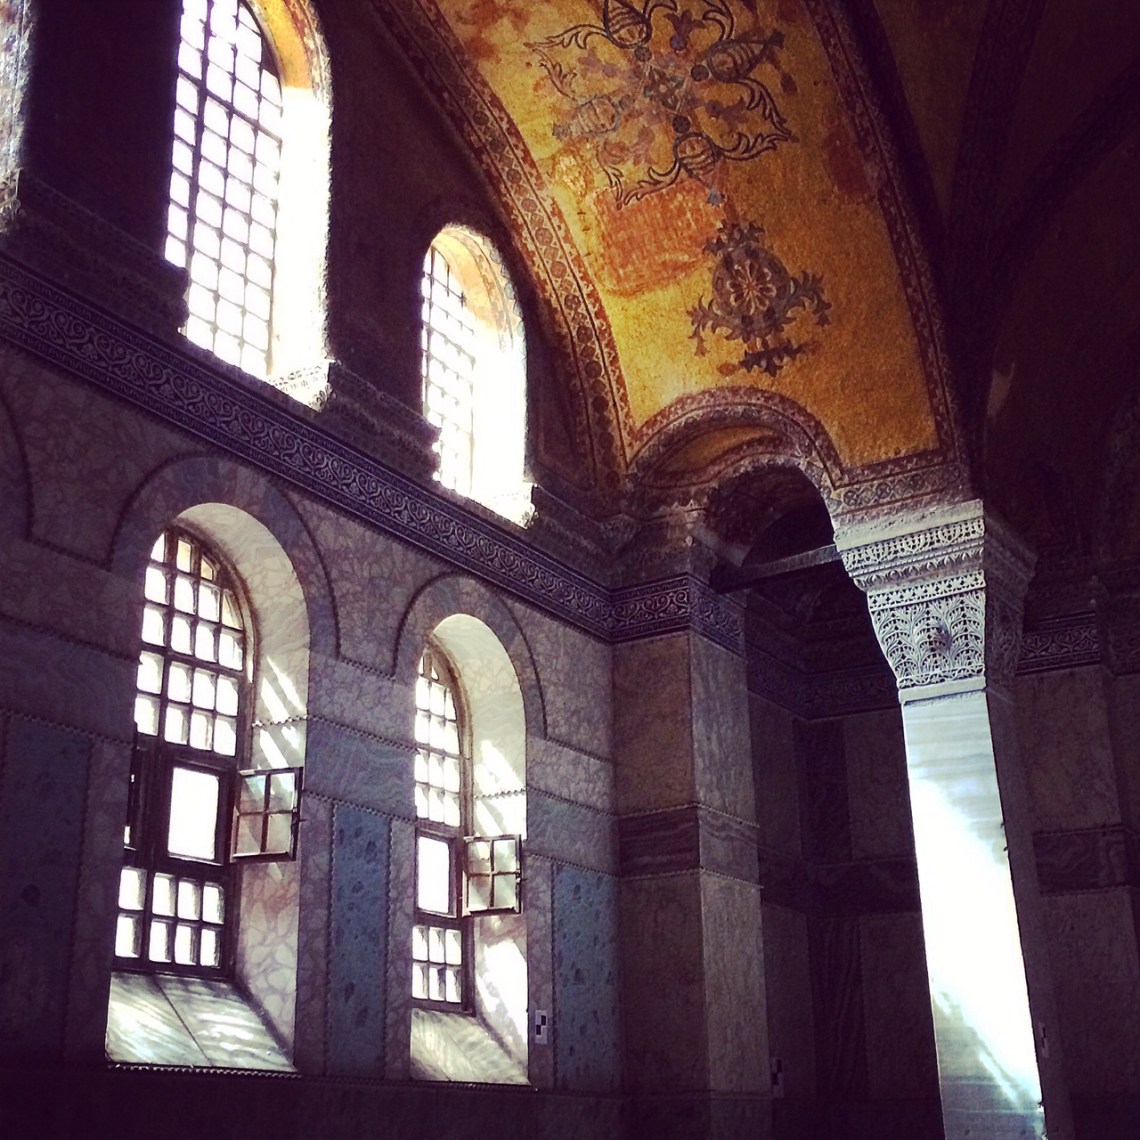 Sunlight entering the Hagia Sofia in Istanbul. Photo by Kate Devine.